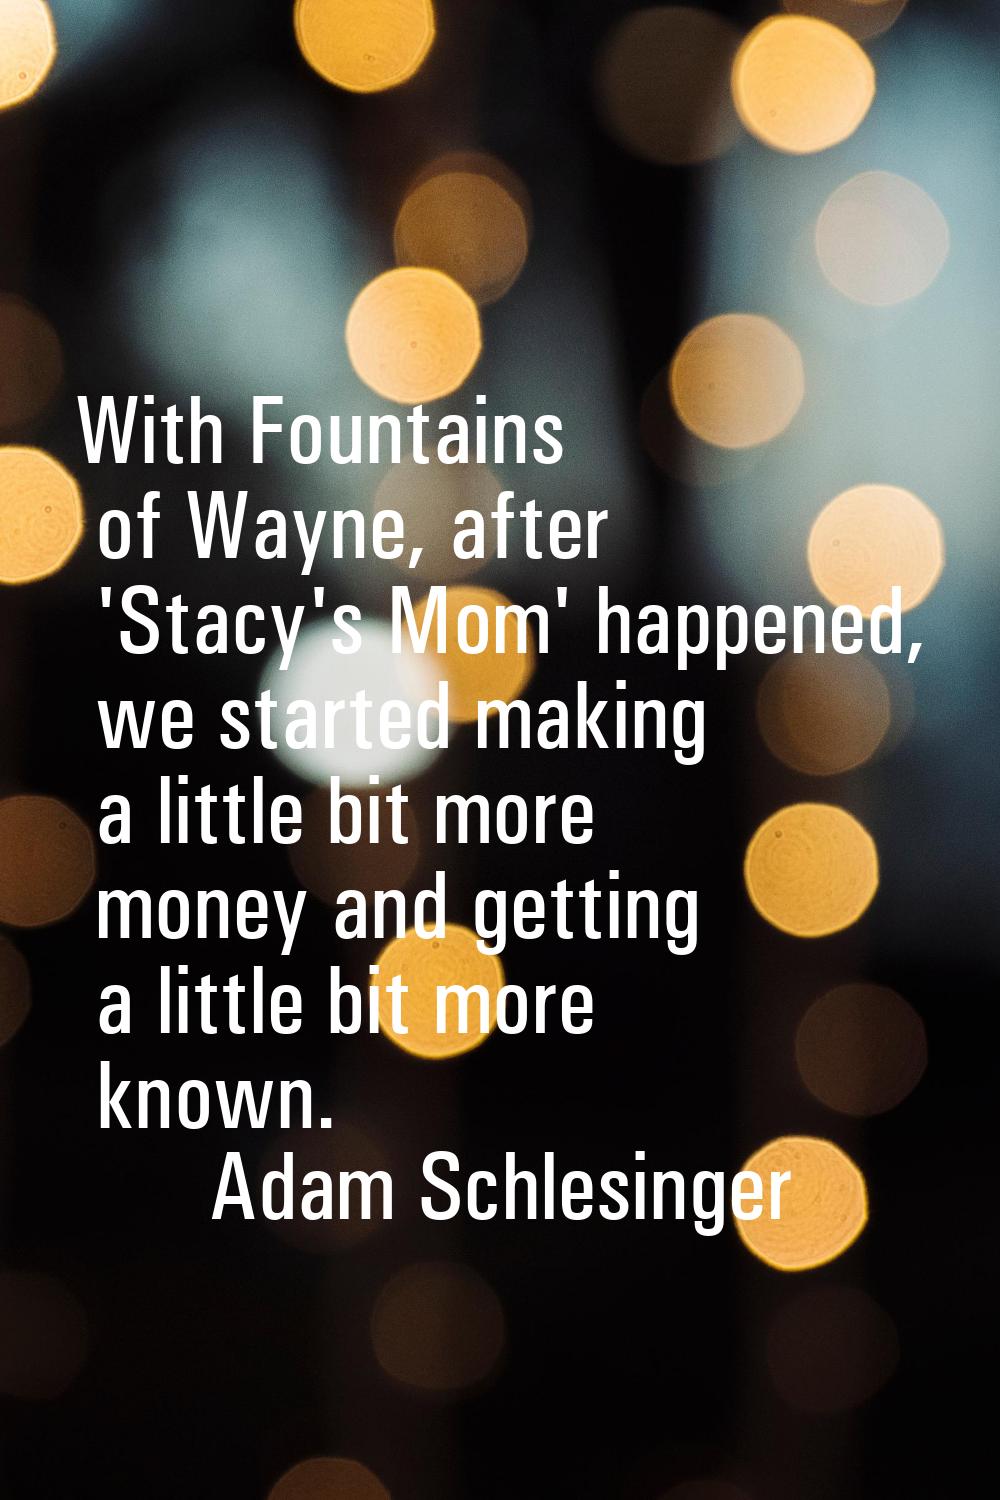 With Fountains of Wayne, after 'Stacy's Mom' happened, we started making a little bit more money an